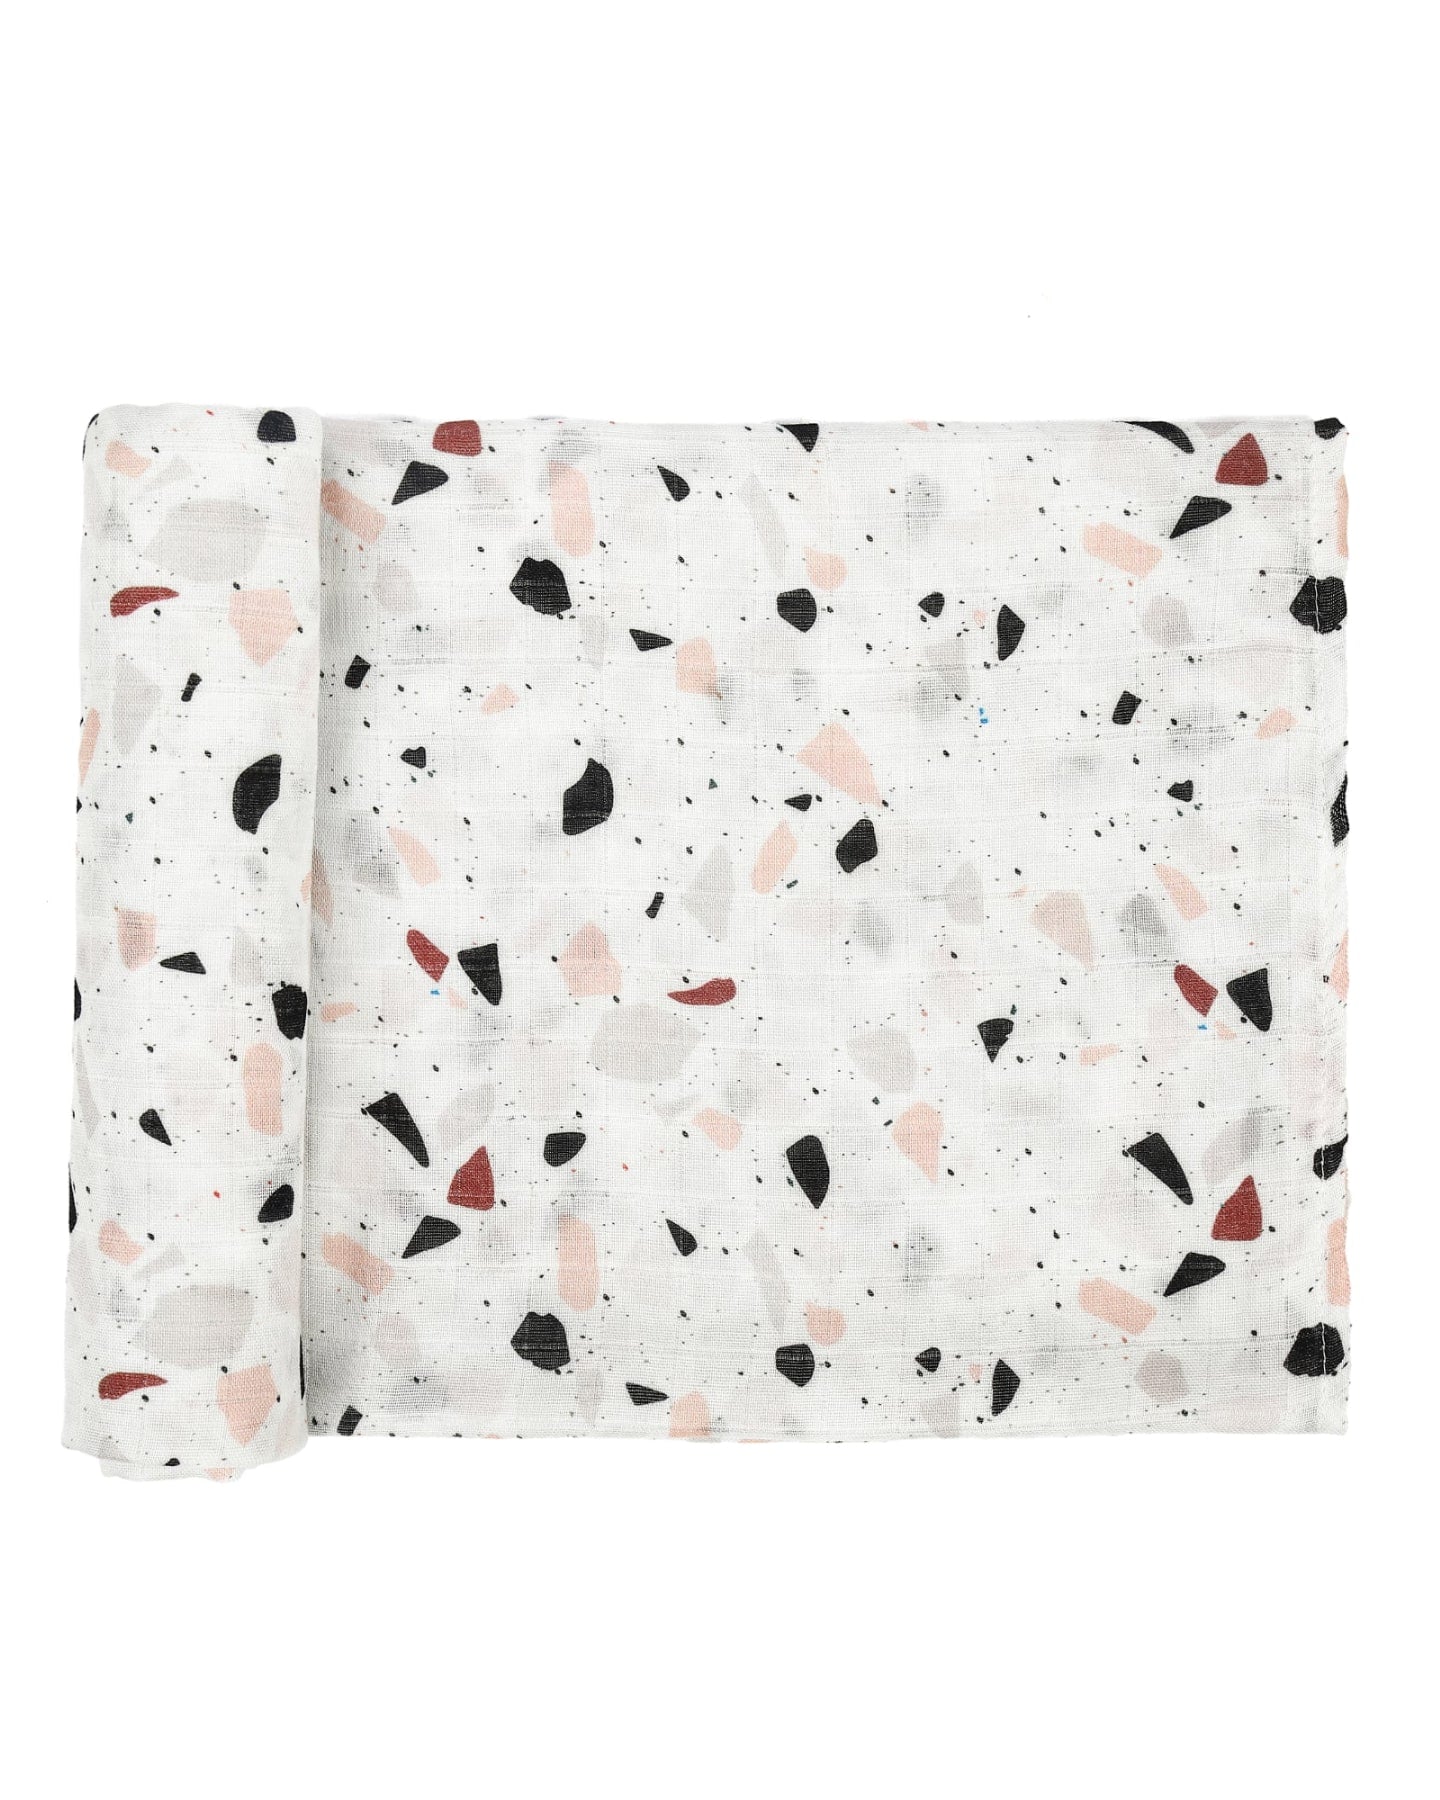 Terrazzo Swaddle - Baby Swaddles at Louie Meets Lola